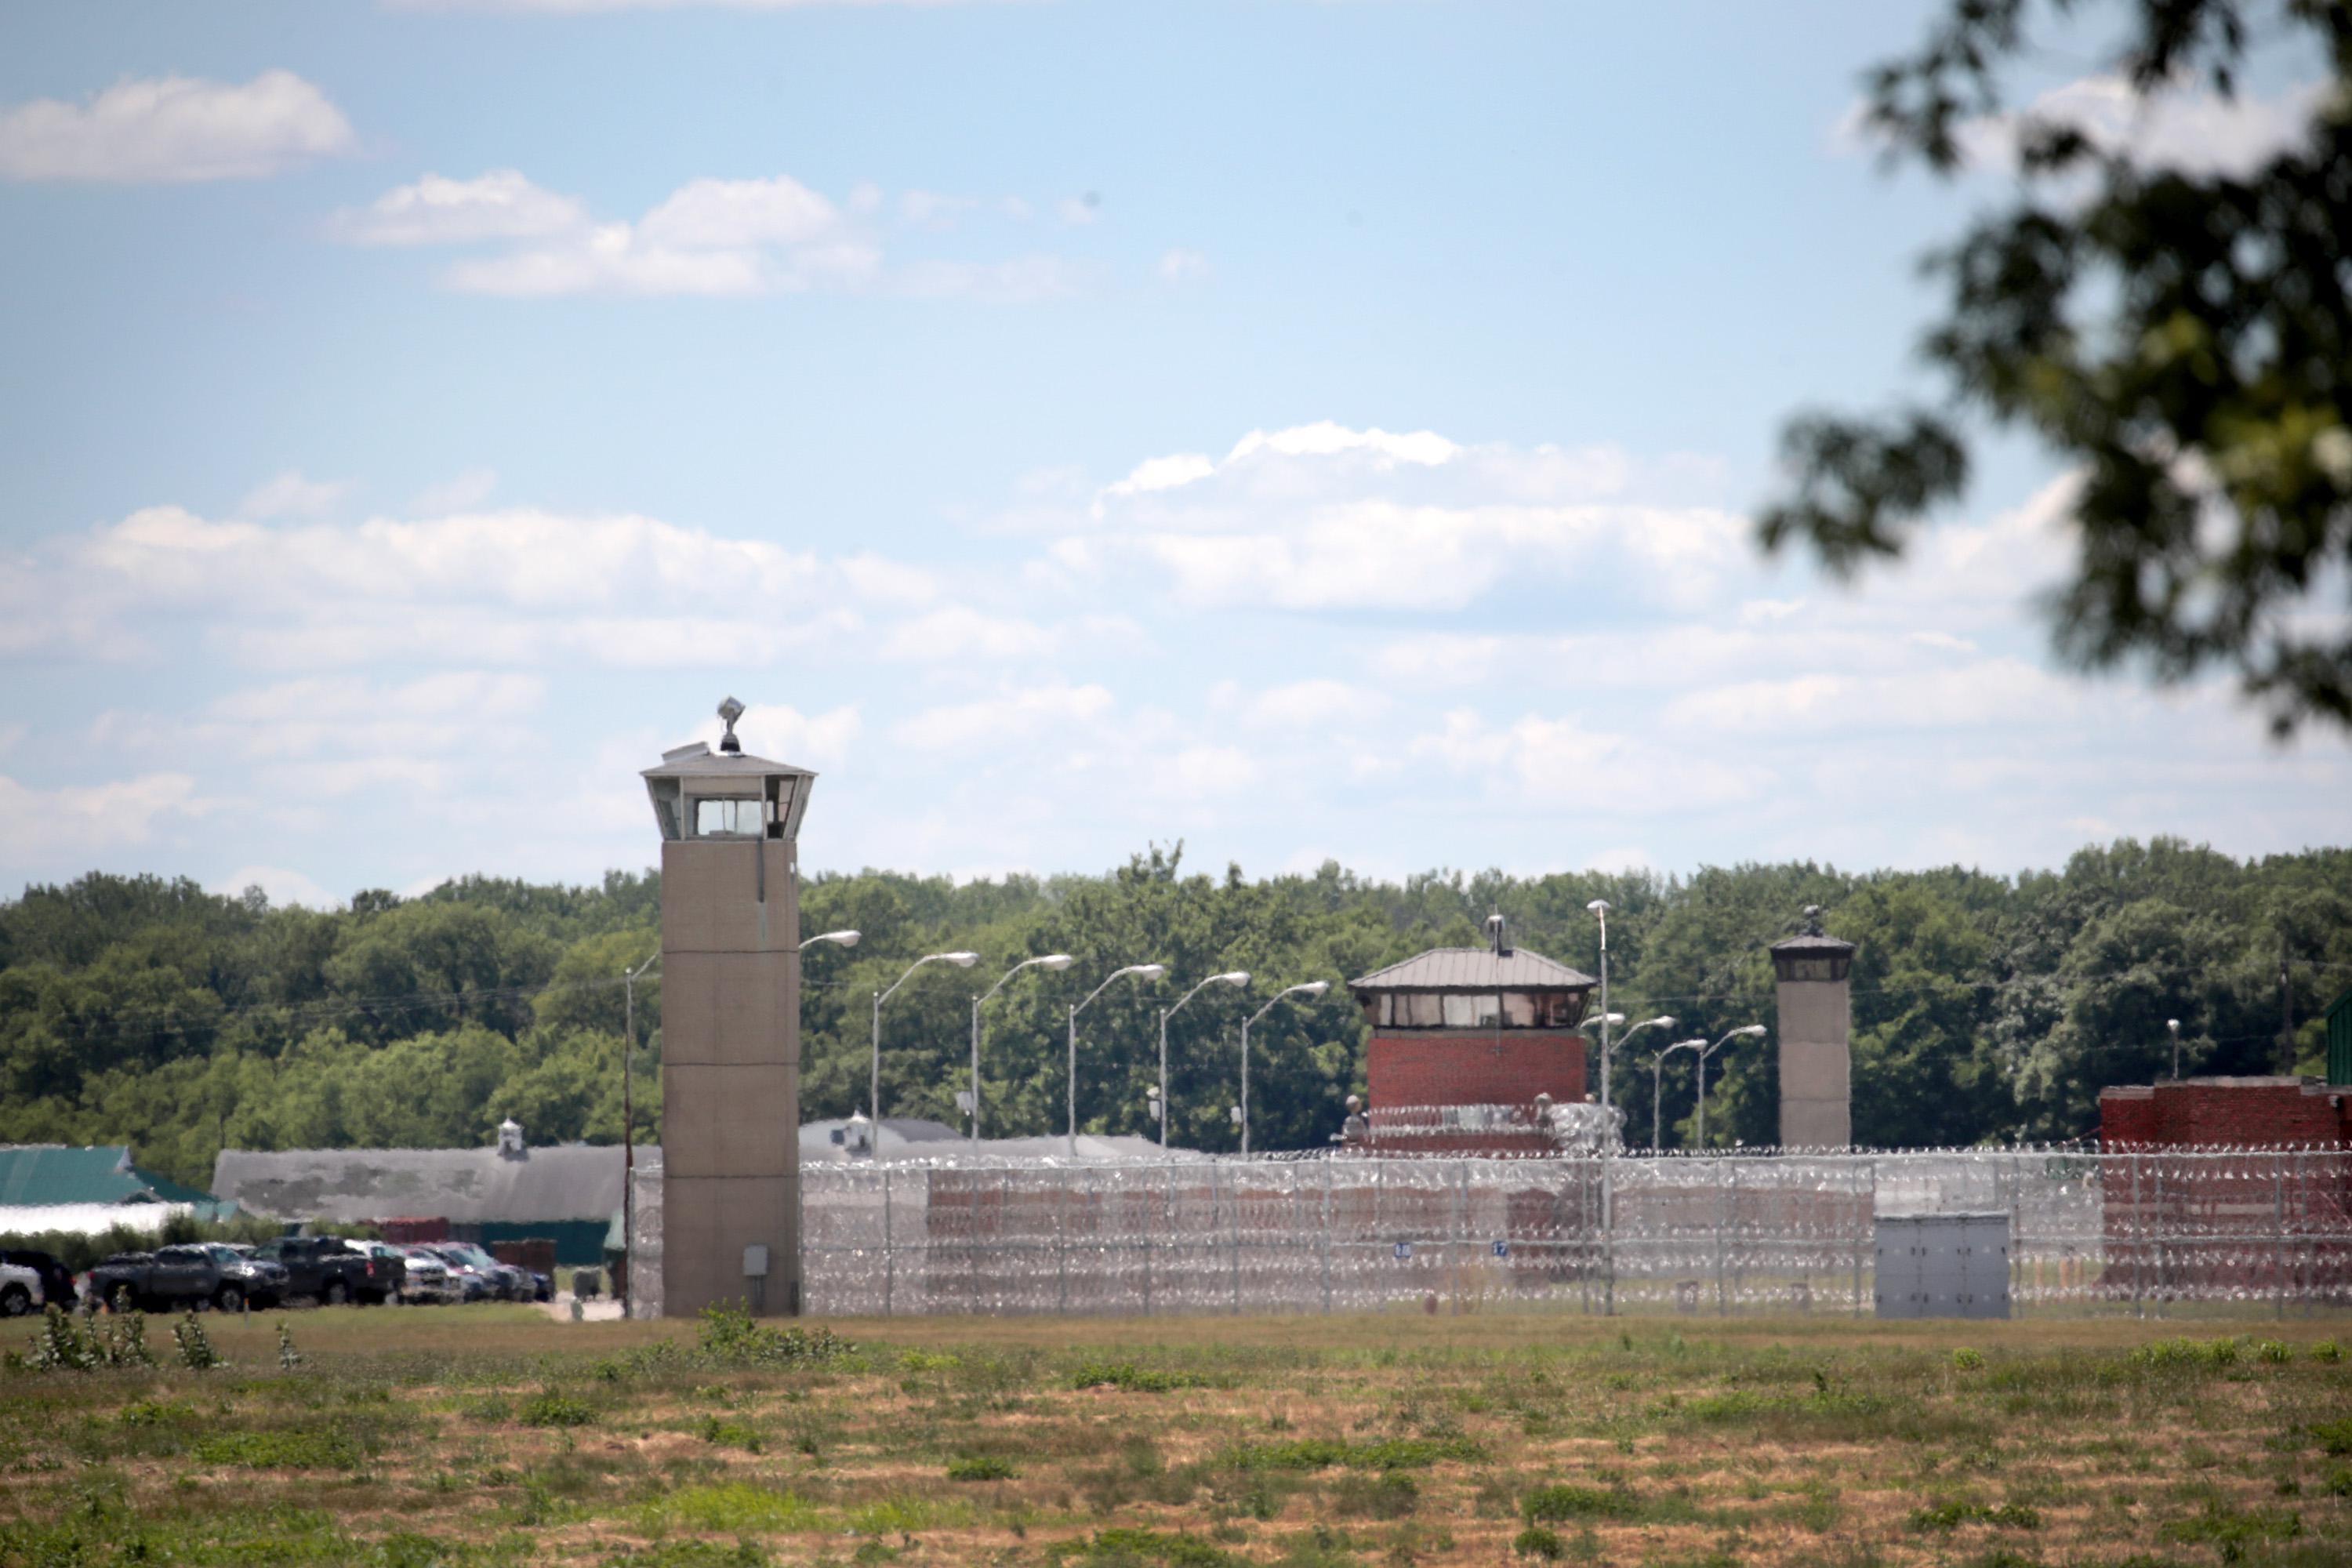 A guard tower sits along a security fence at the Federal Correctional Complex